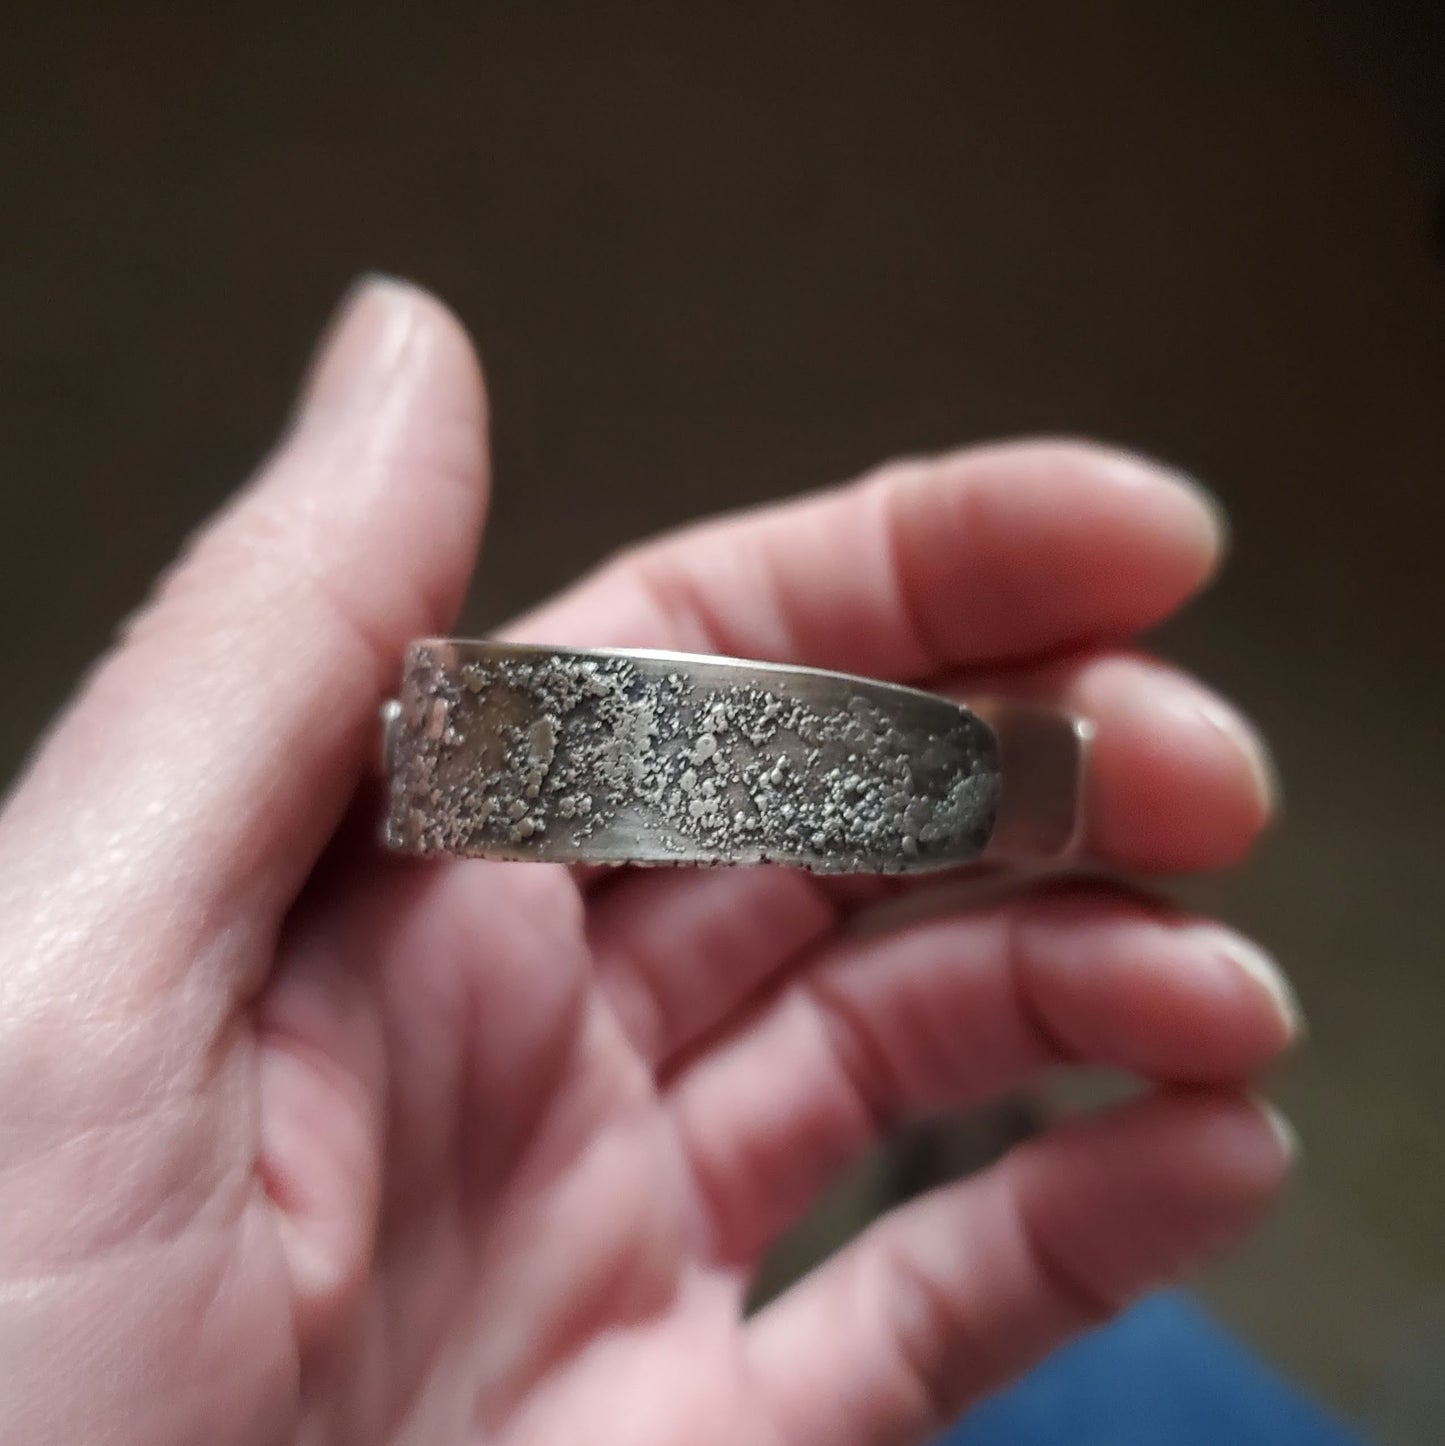 Know Your Worth - Reclaimed Silver Cuff